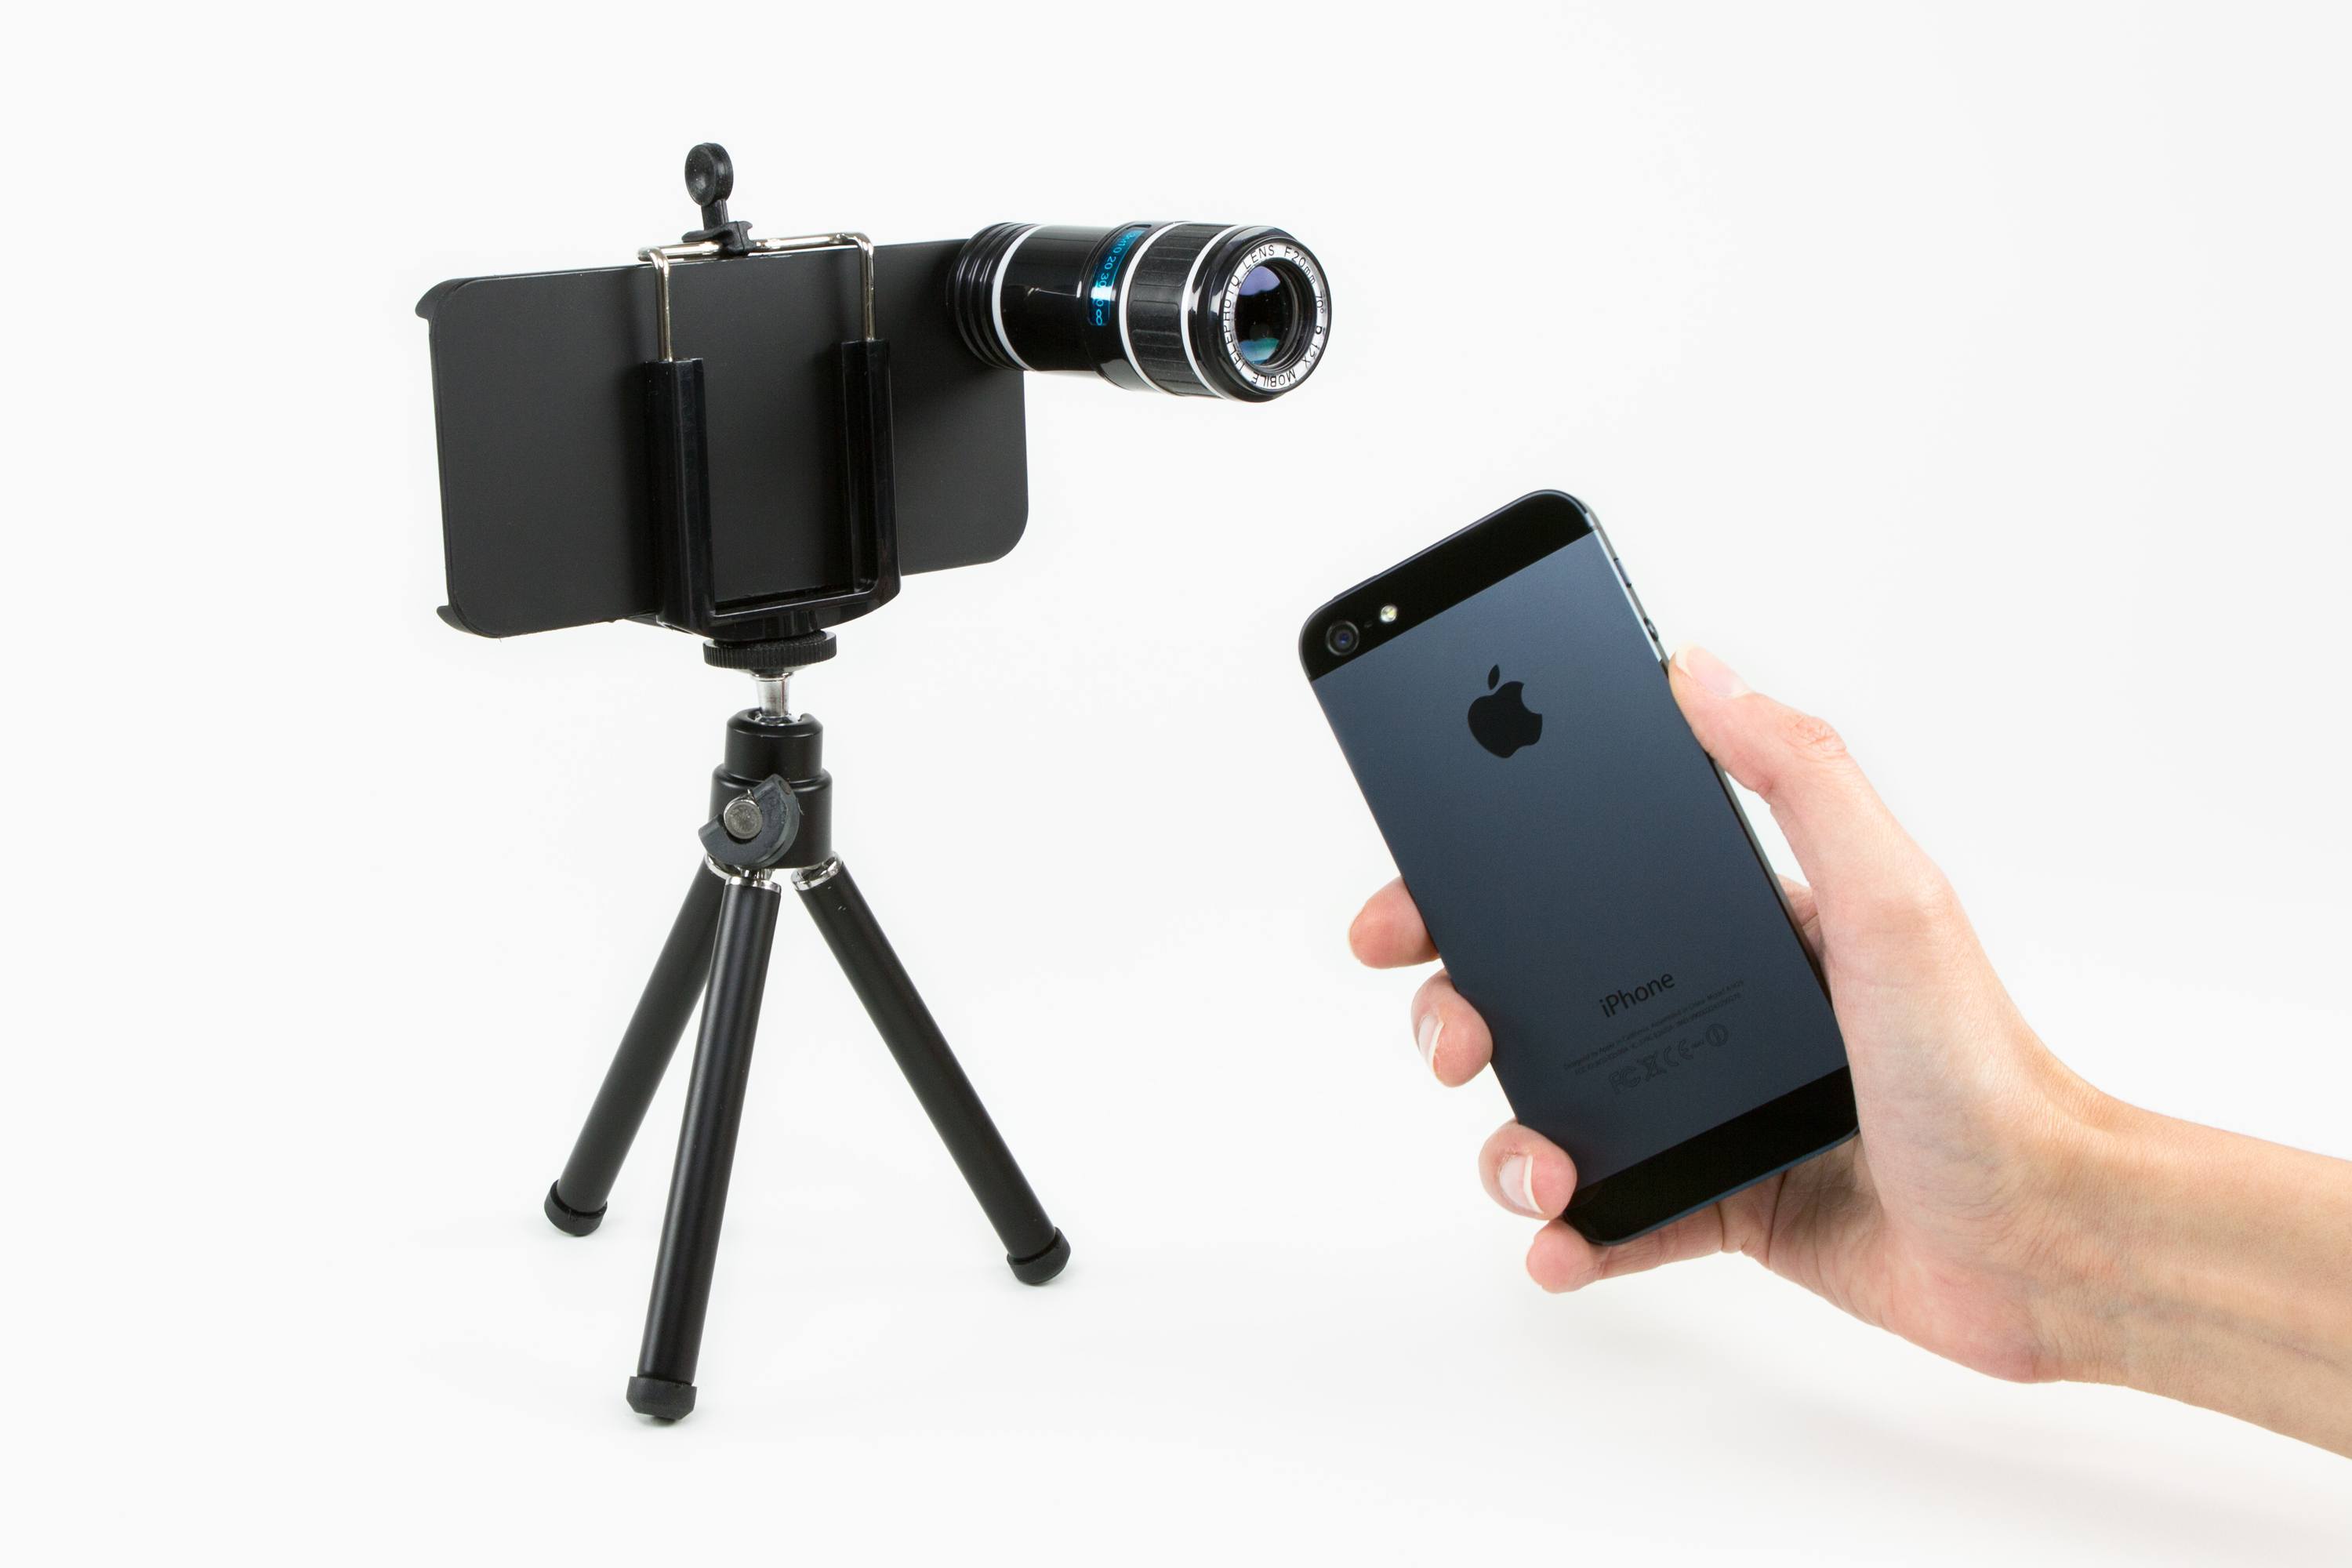 10 Amazing iPhone Camera Add-ons You Have To Check Out